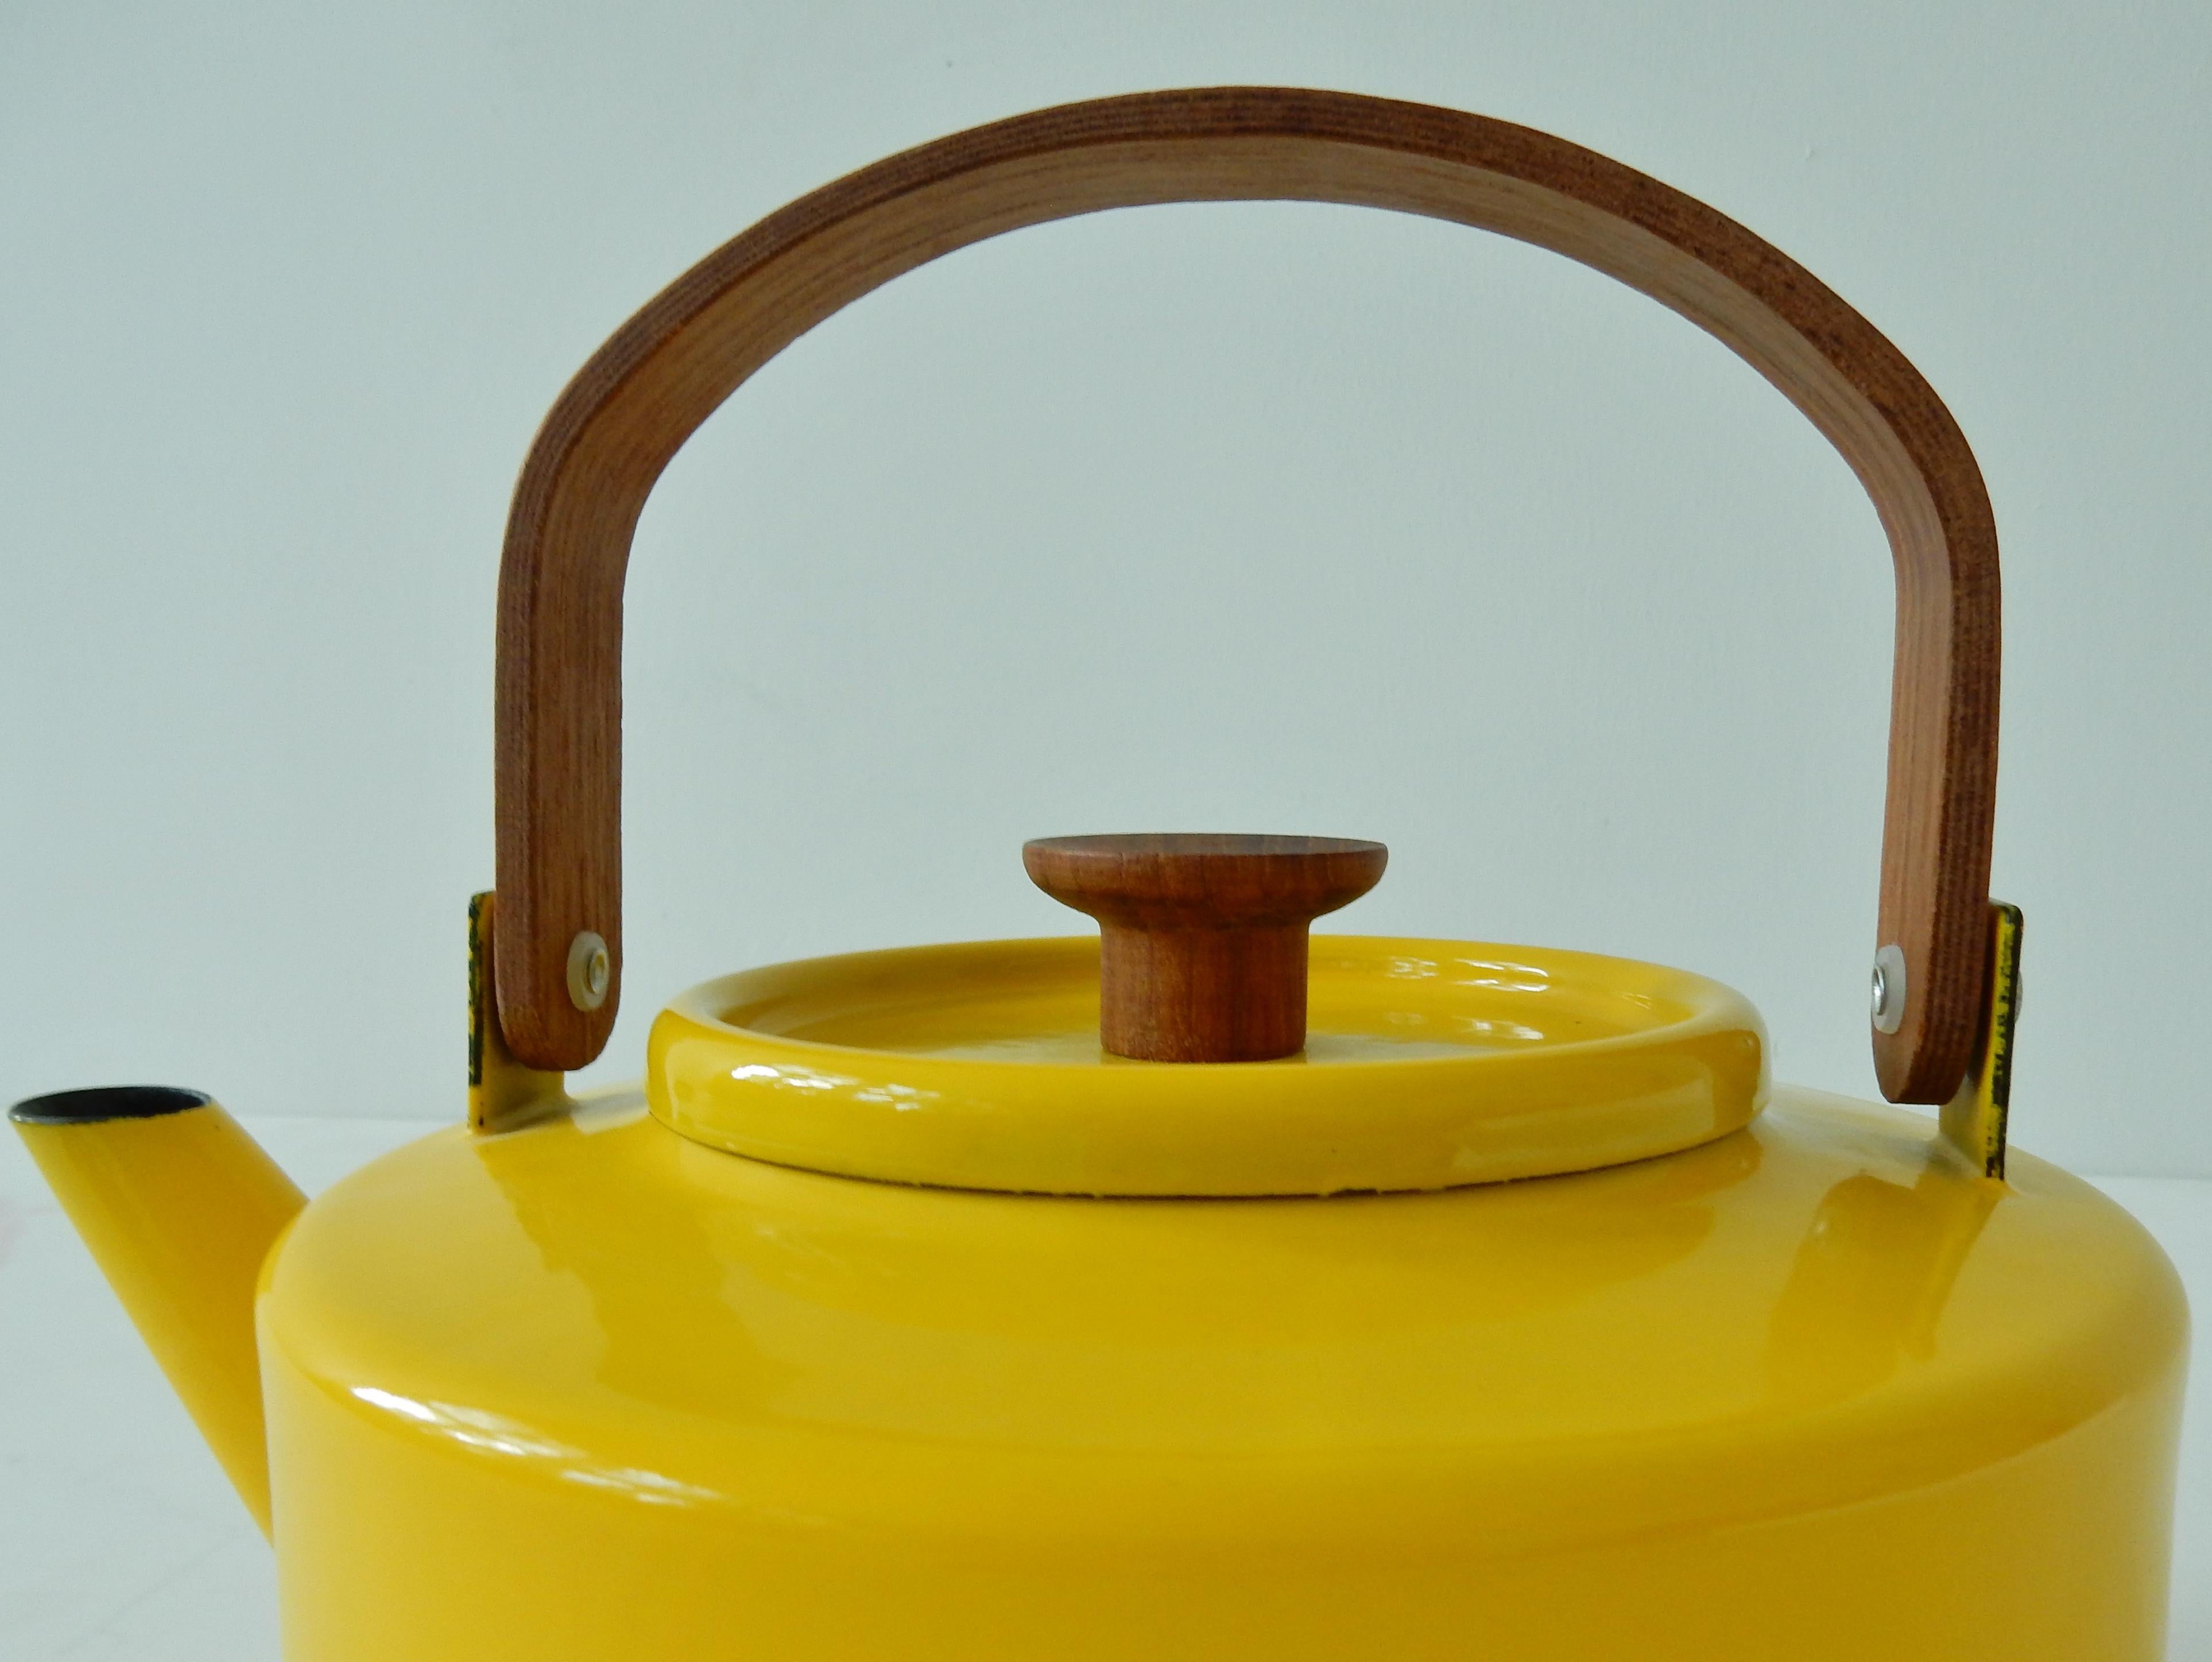 Spanish Enameled Yellow Teapot by Michael Lax for Copco, Spain, 1960